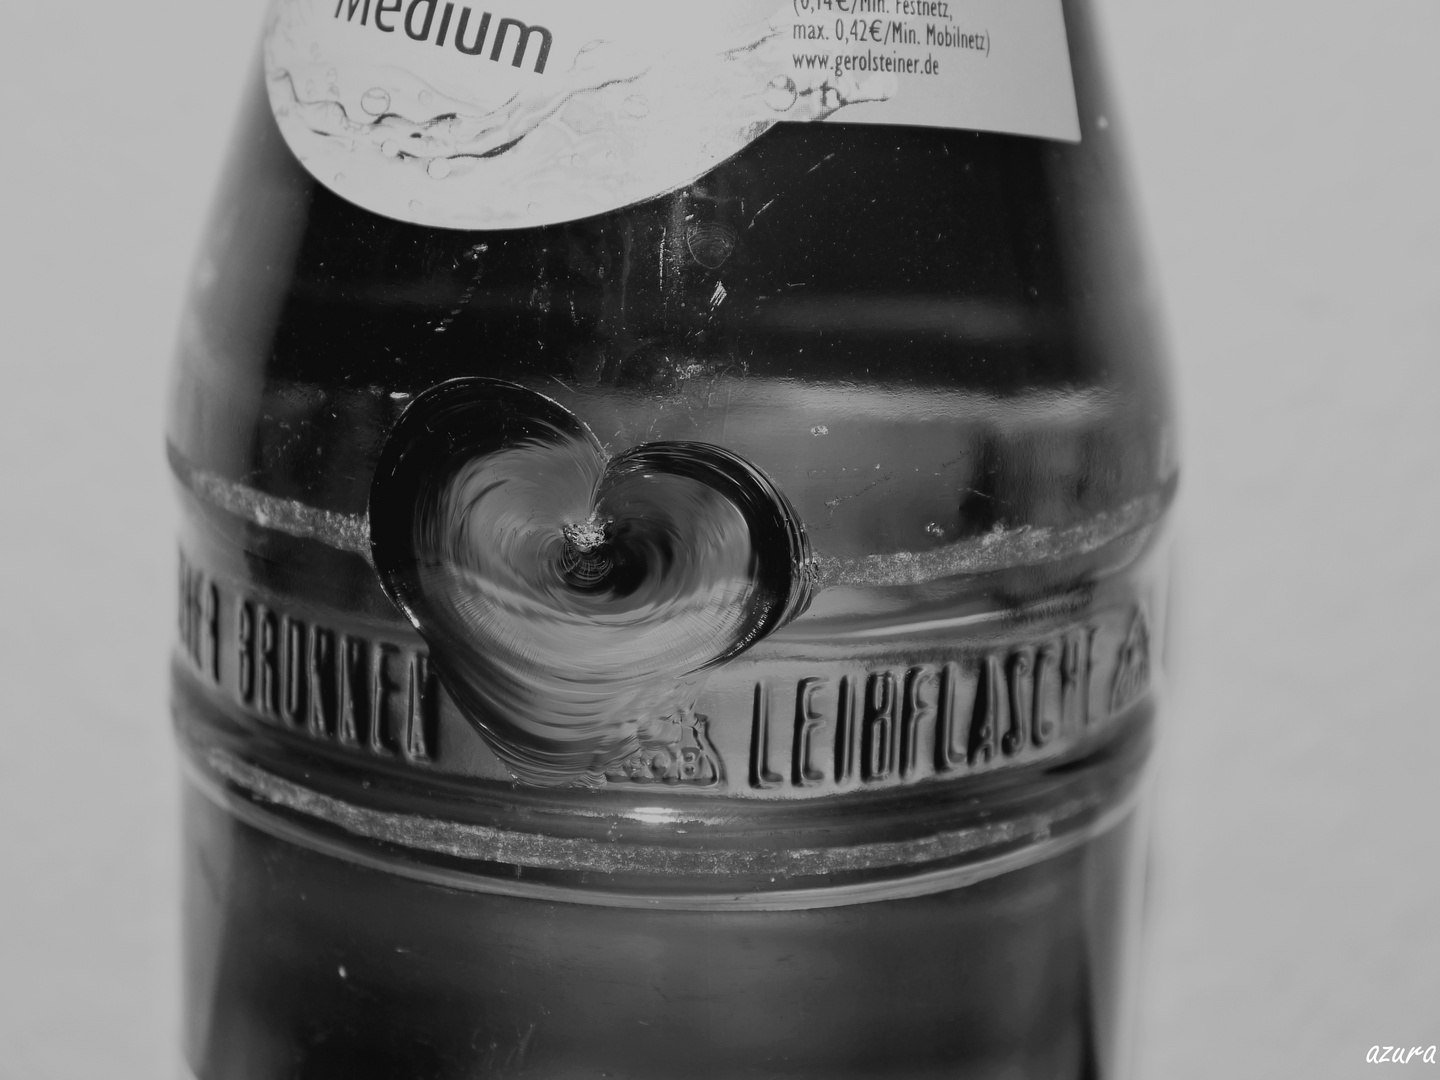 the bottle with the heart